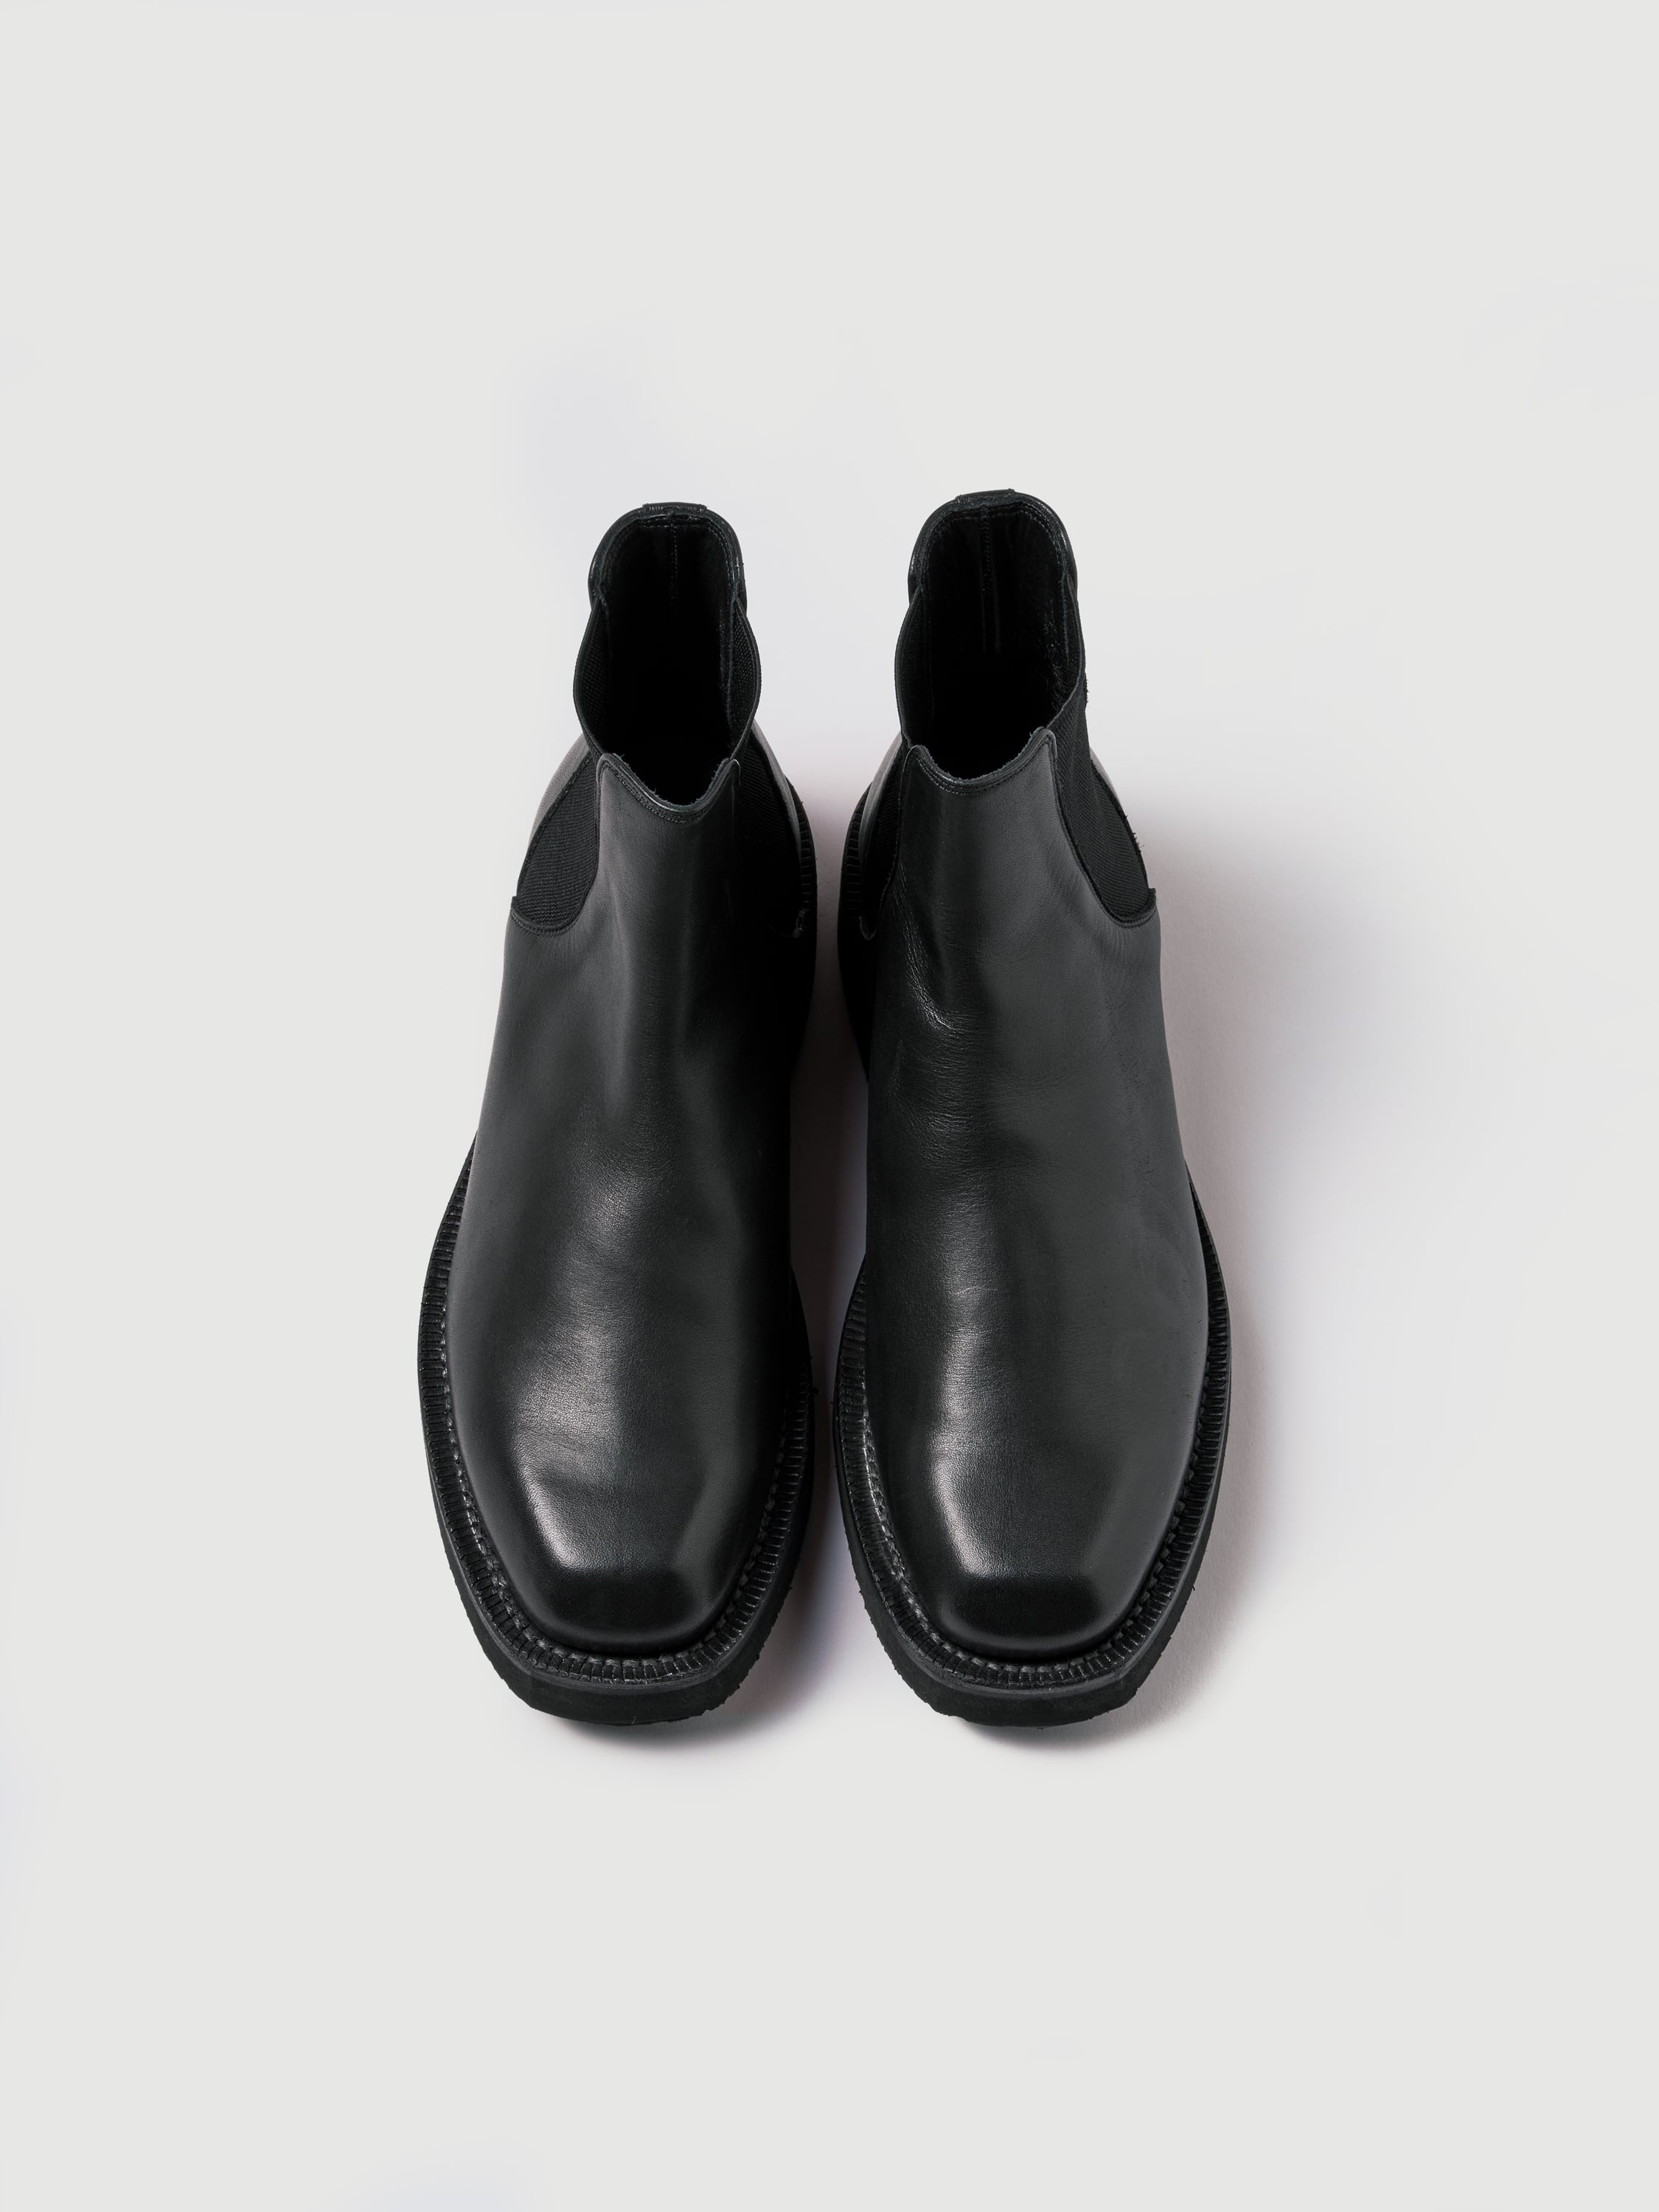 LEATHER SQUARE BOOTS MADE BY FOOT THE COACHER 詳細画像 BLACK 2